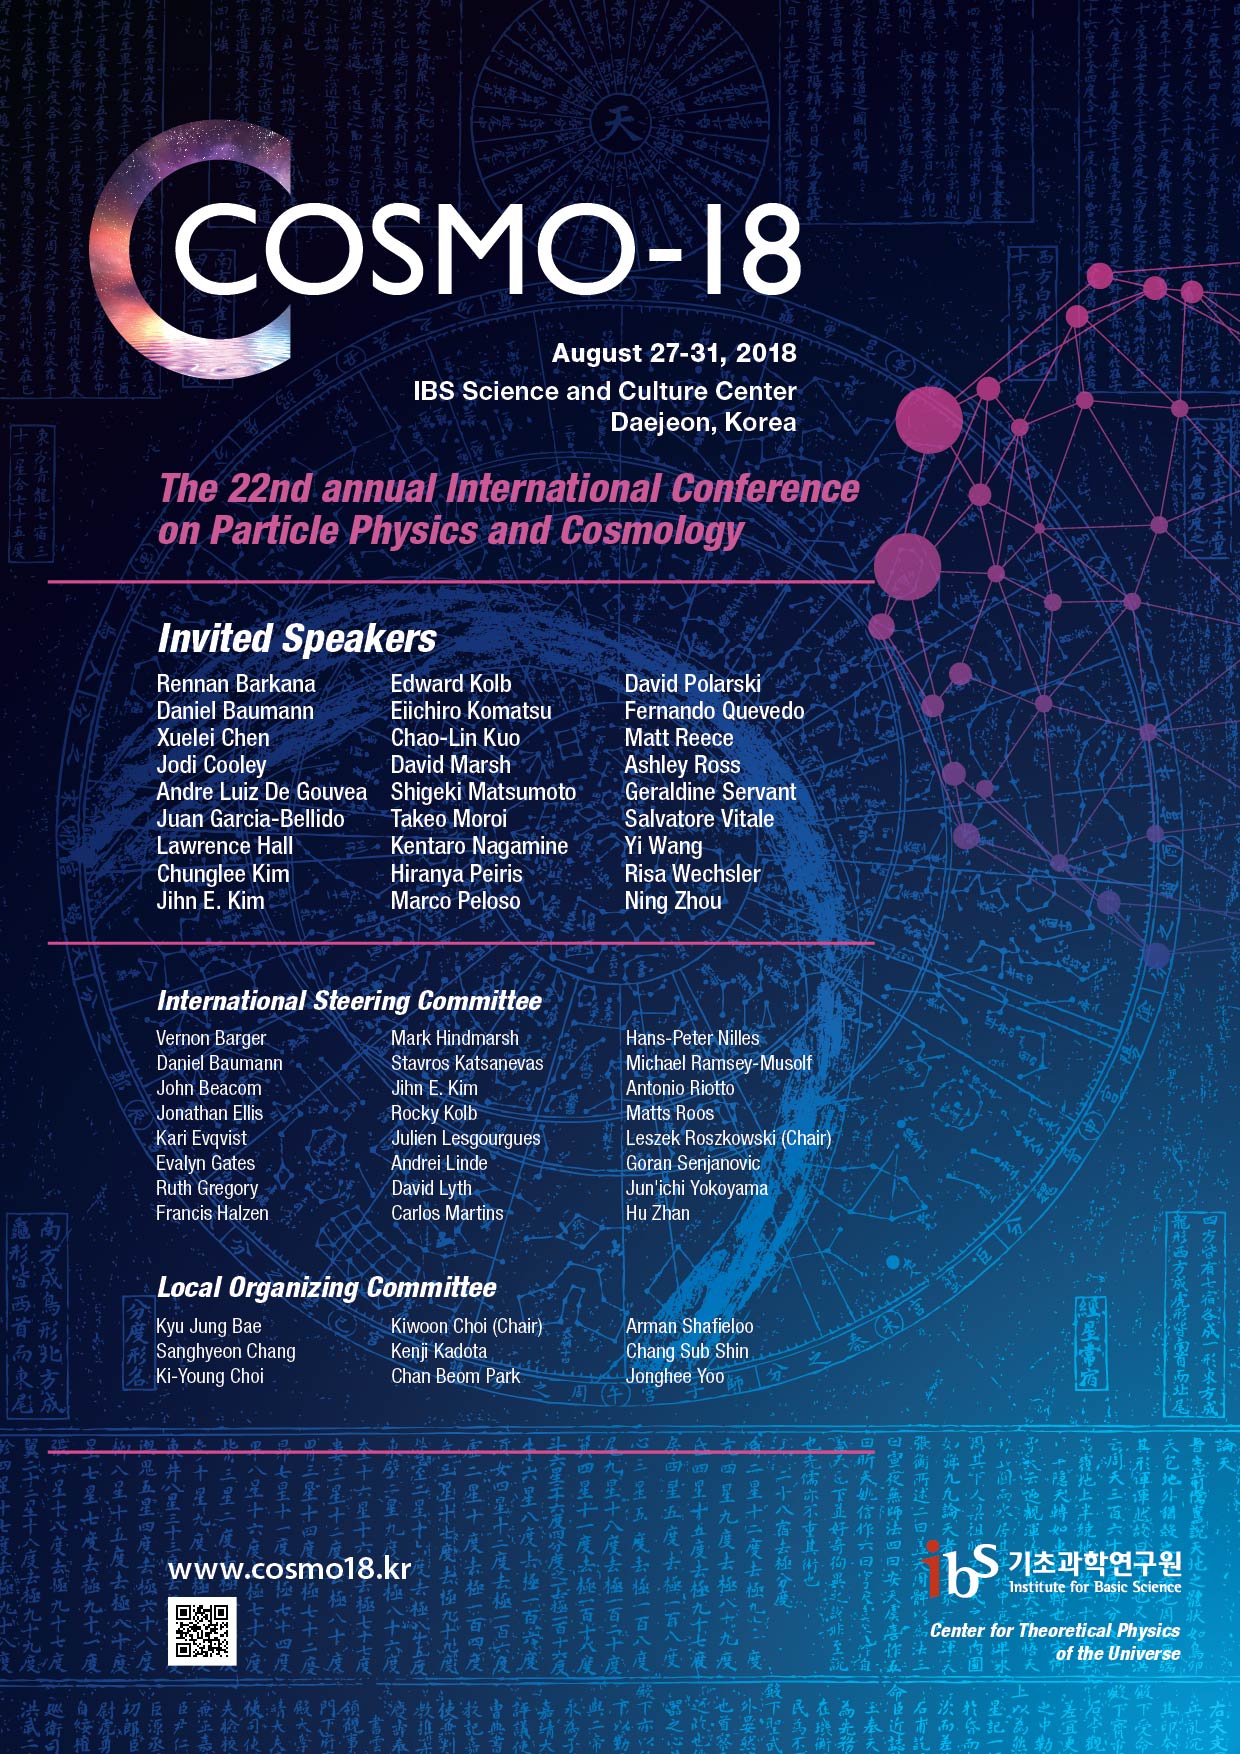 The 22nd annual International Conference on Particle Physics and Cosmology